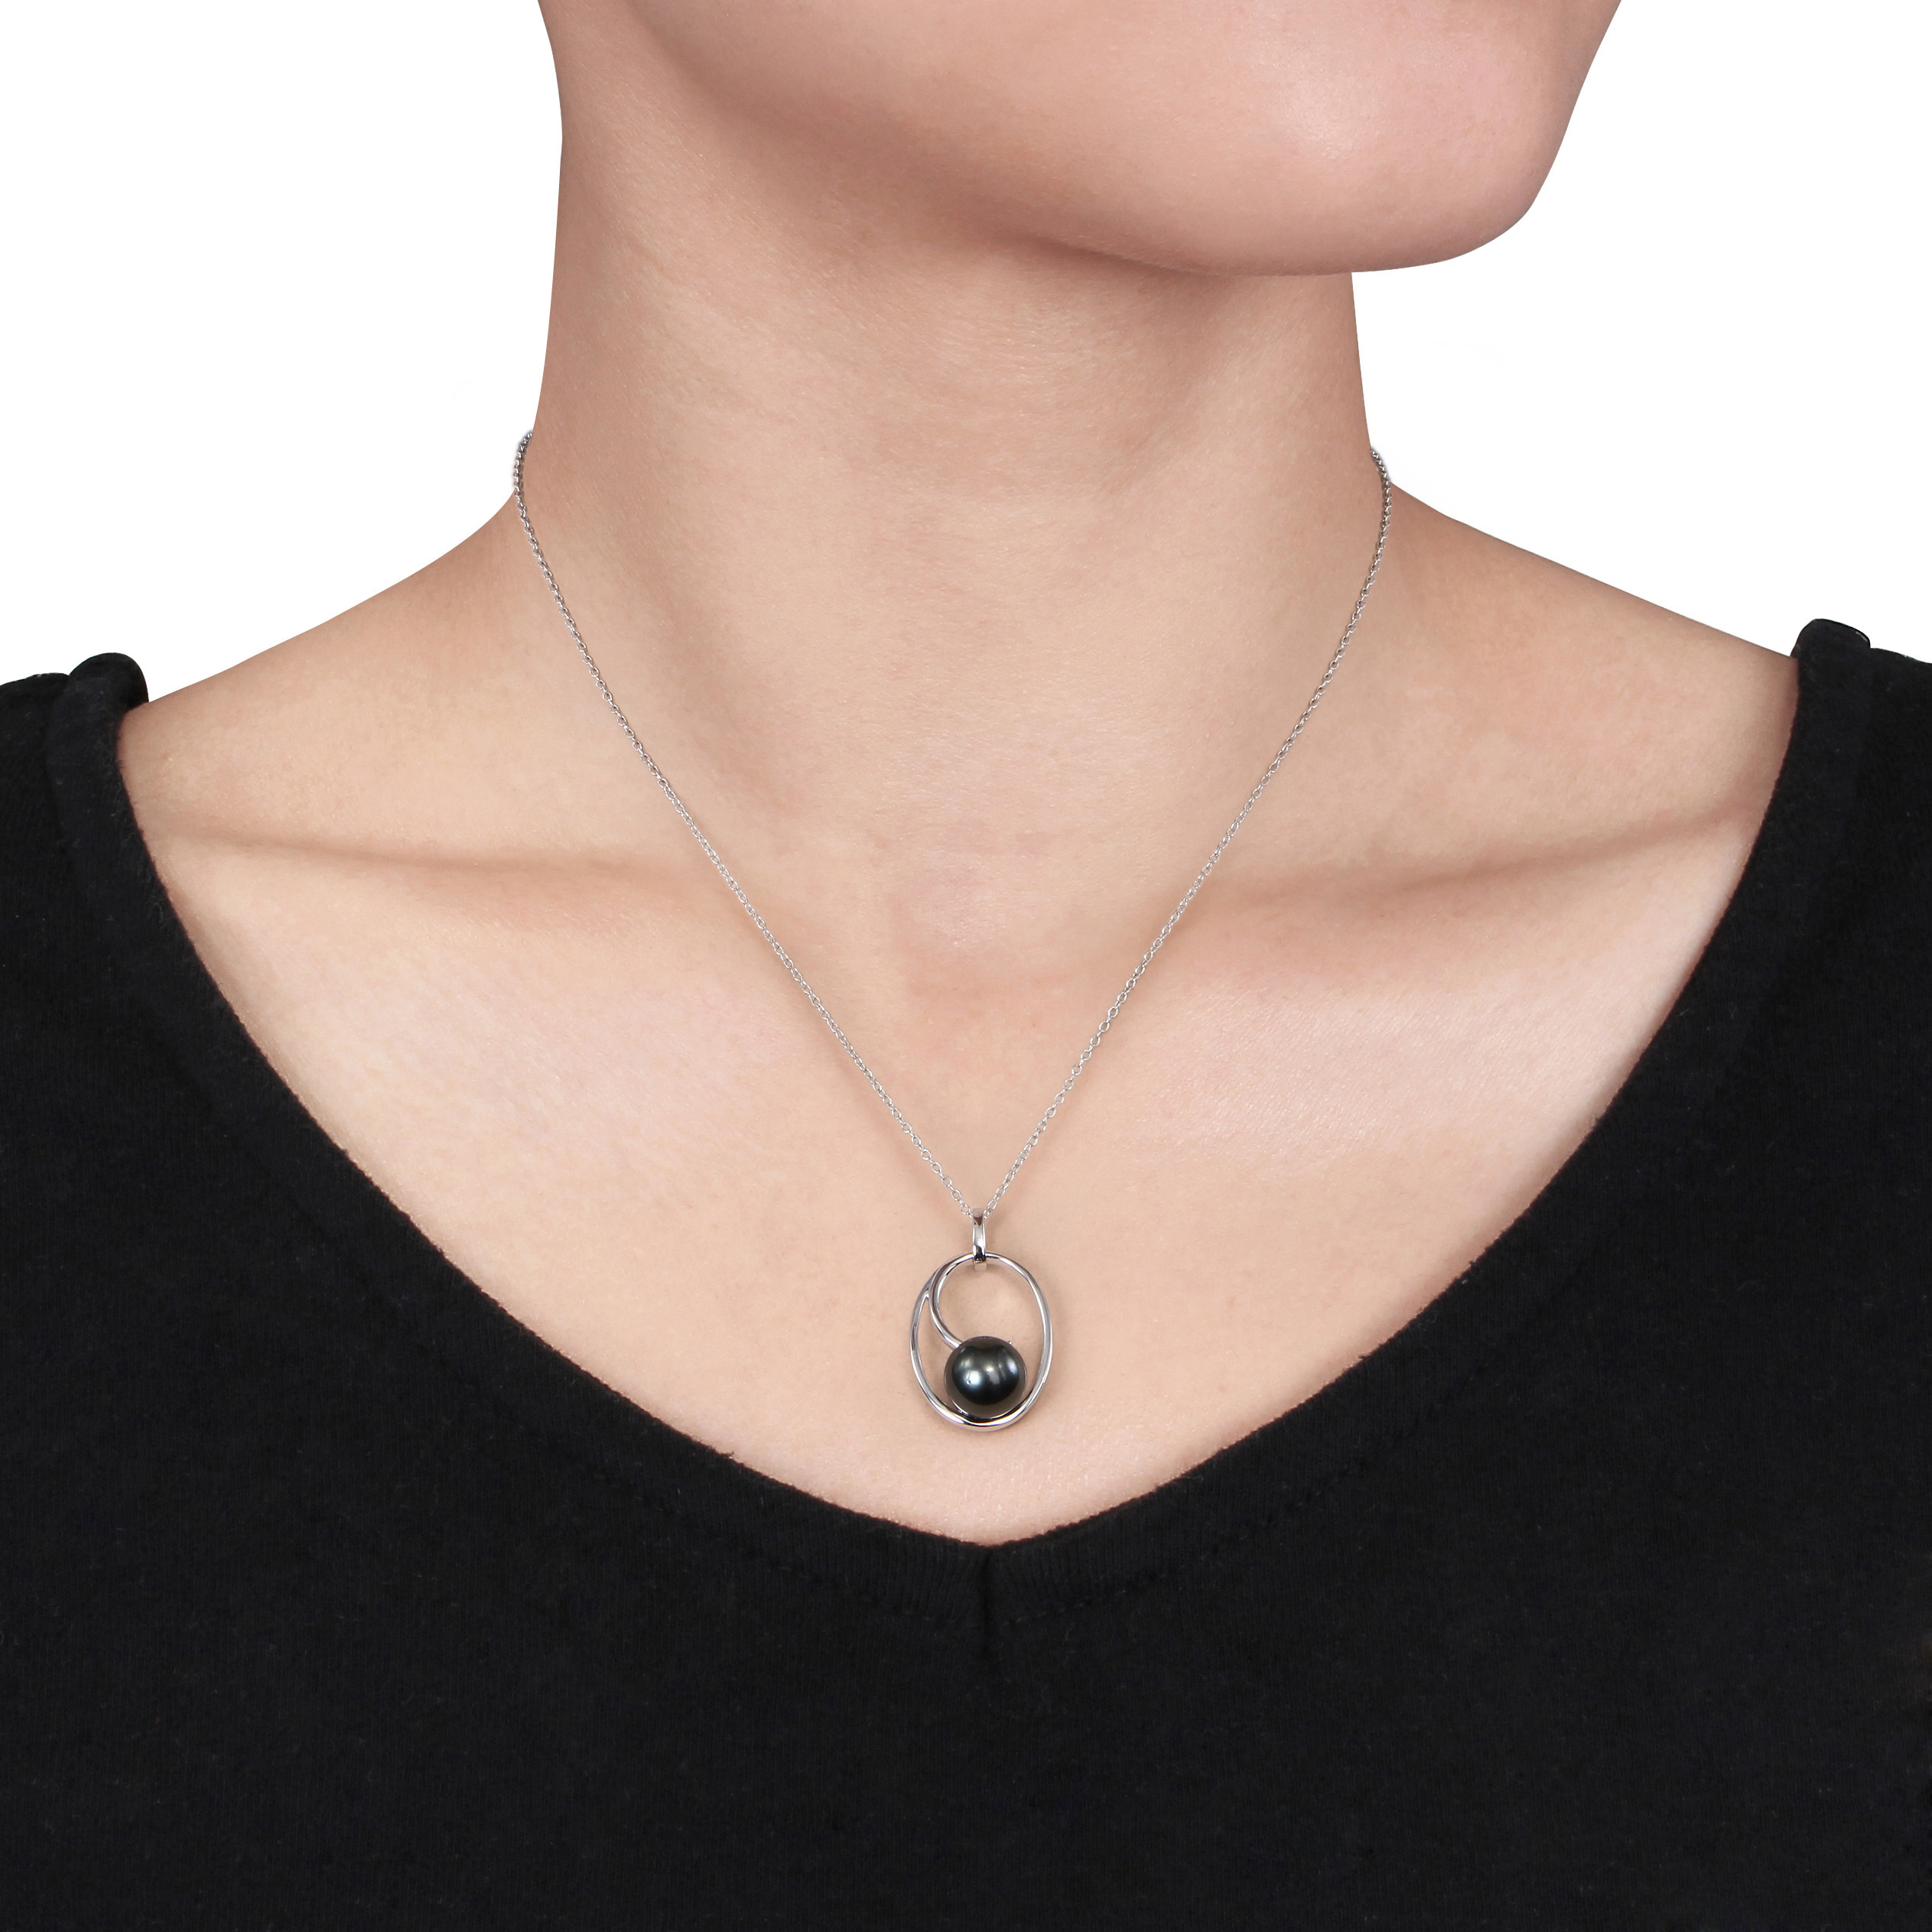 9.5 - 10 MM Black Tahitian Cultured Pearl Geometric Pendant with Chain in Sterling Silver - 18 in.